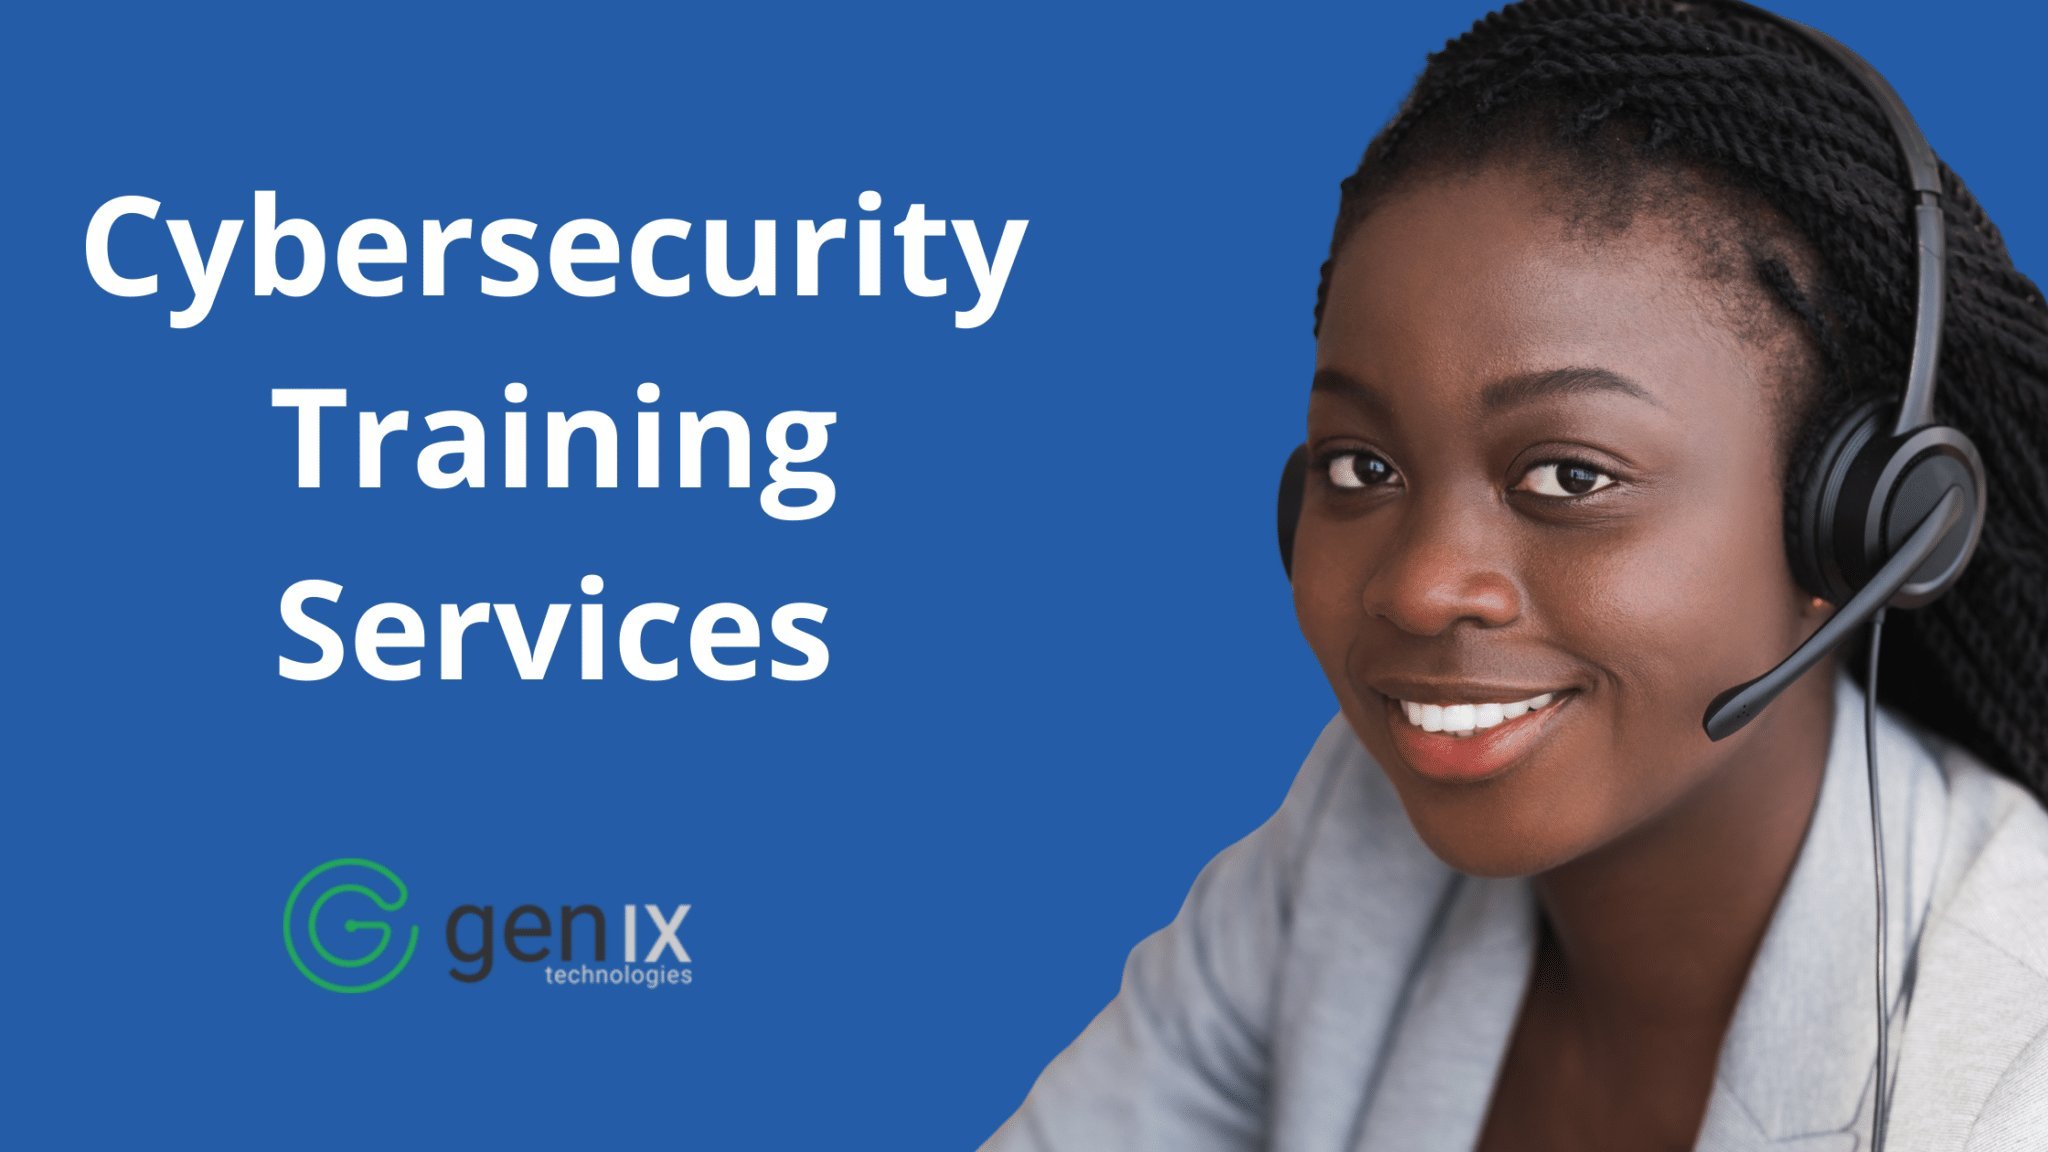 Cybersecurity Training Services